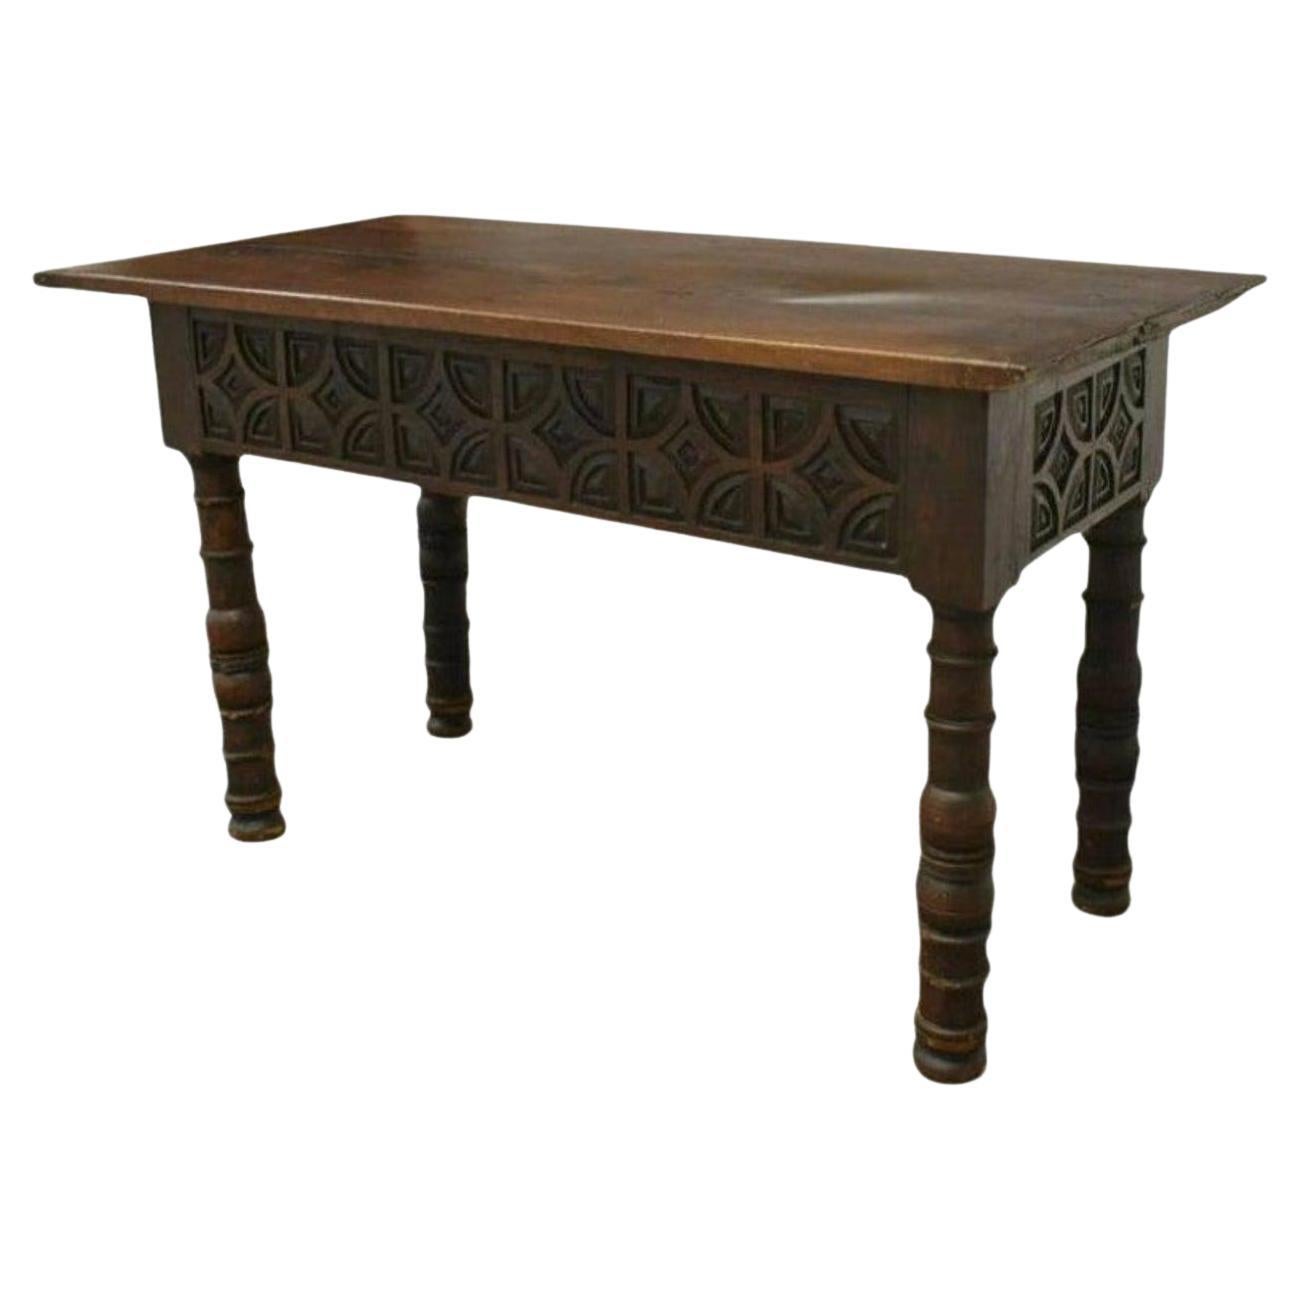 18th Century Spanish Baroque Period Carved Walnut Geometric Table For Sale